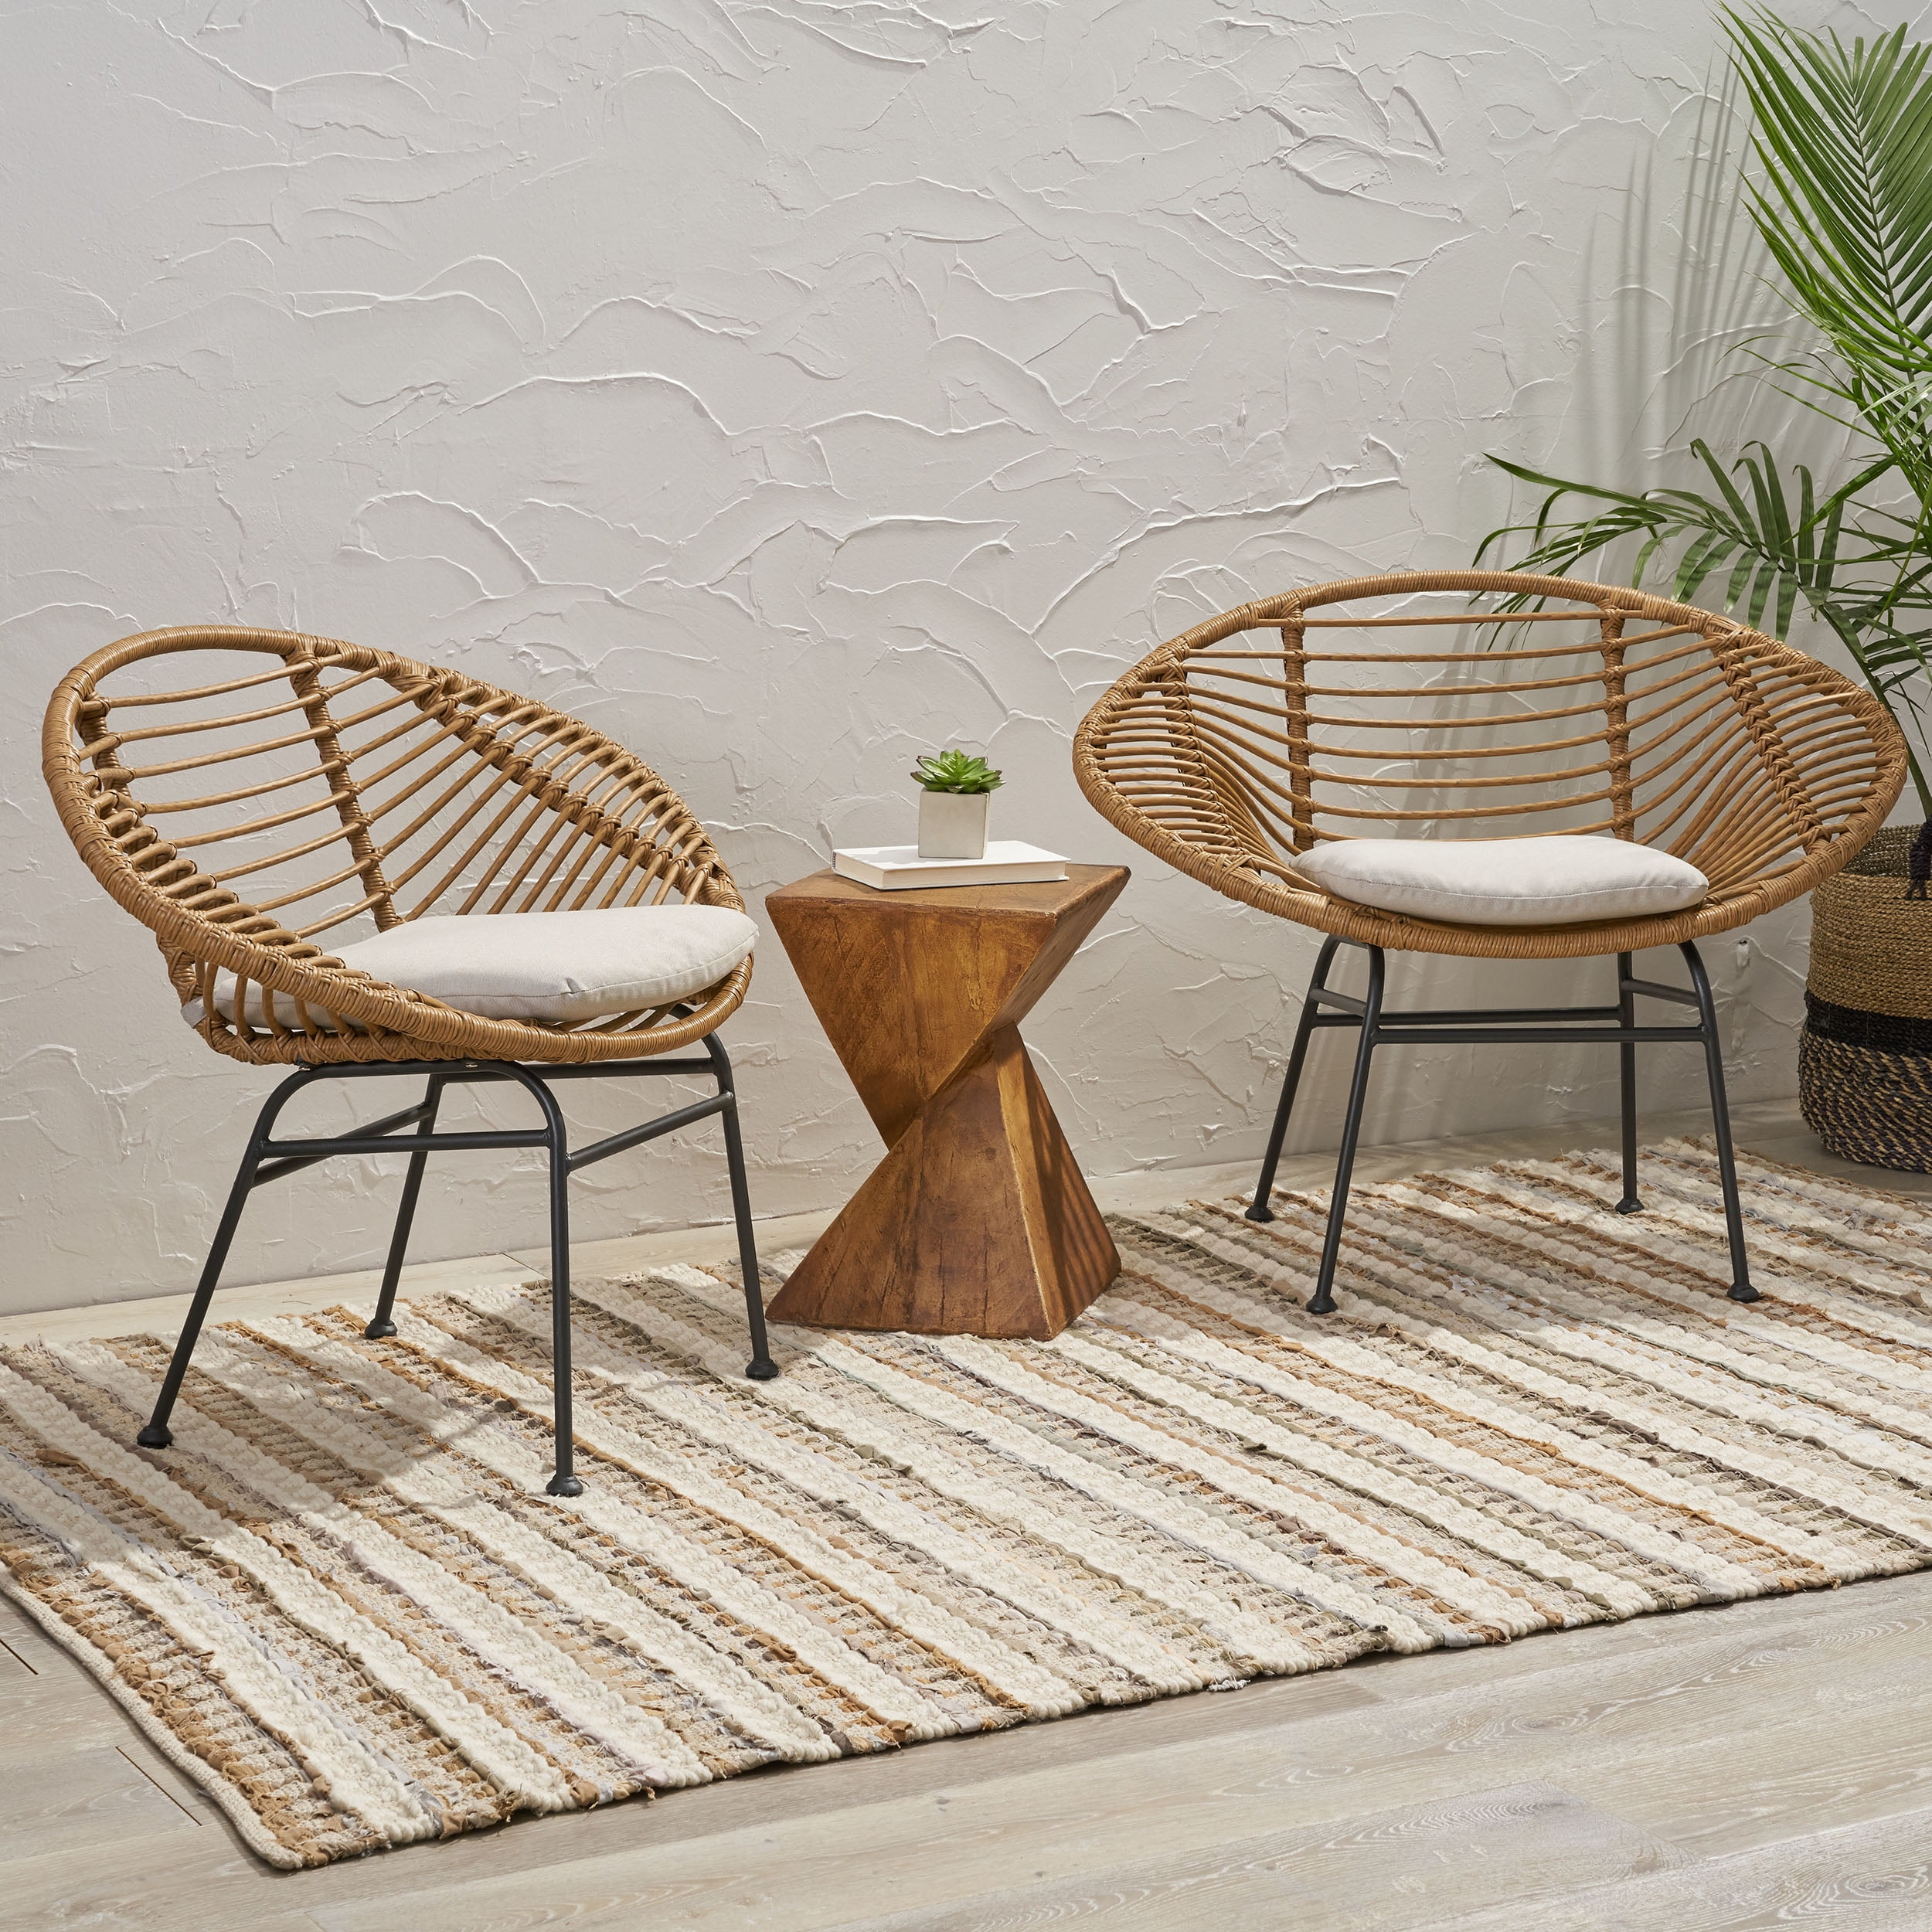 Noble House Anton Outdoor Woven Wicker Chairs with Cushions, Set of 2, Light Brown, Beige Finish - image 1 of 10